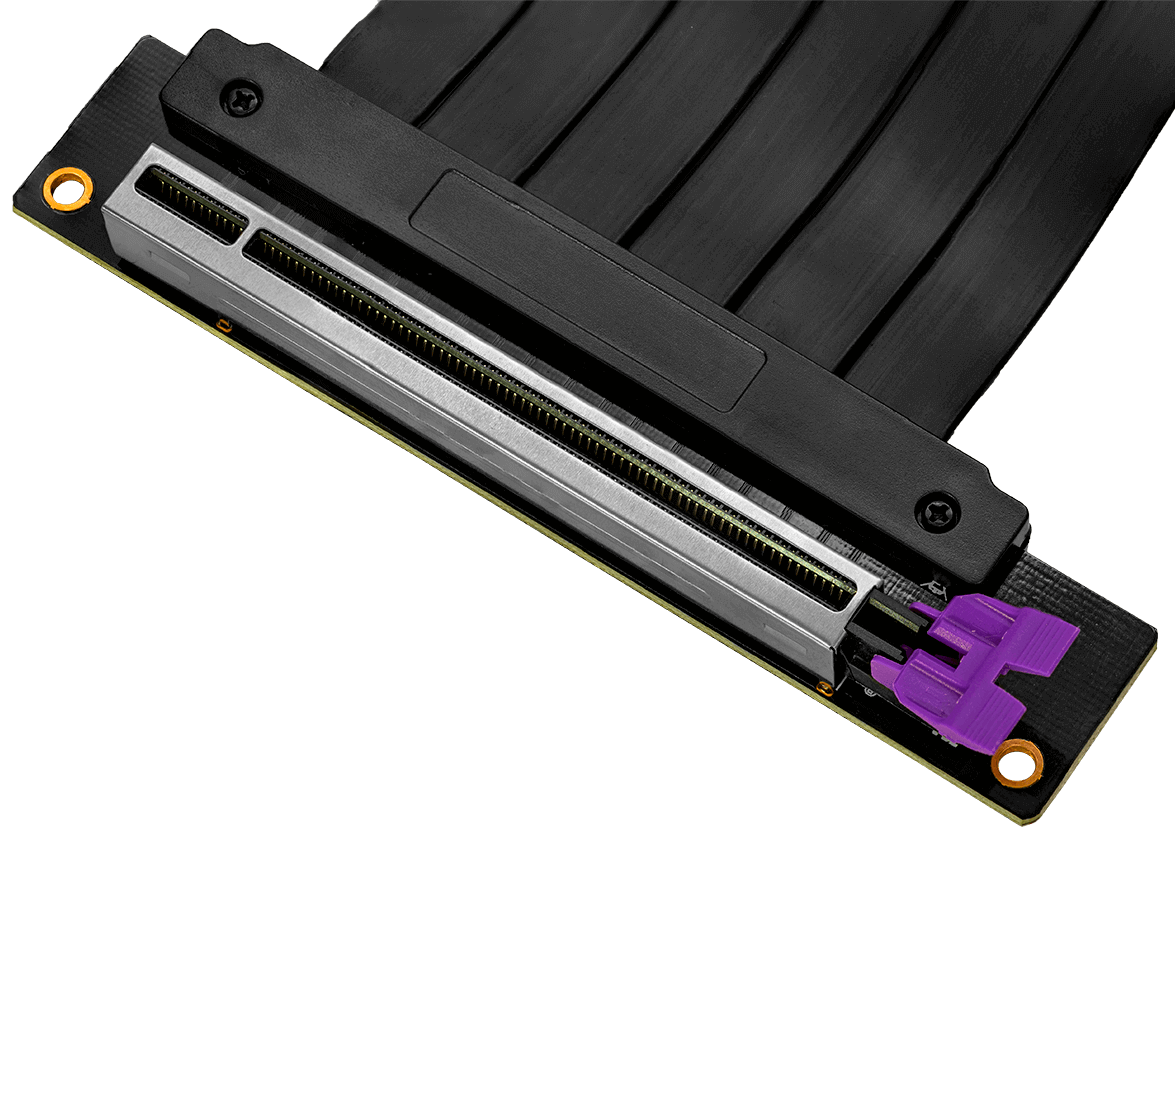 Stainless steel-reinforced PCI slot